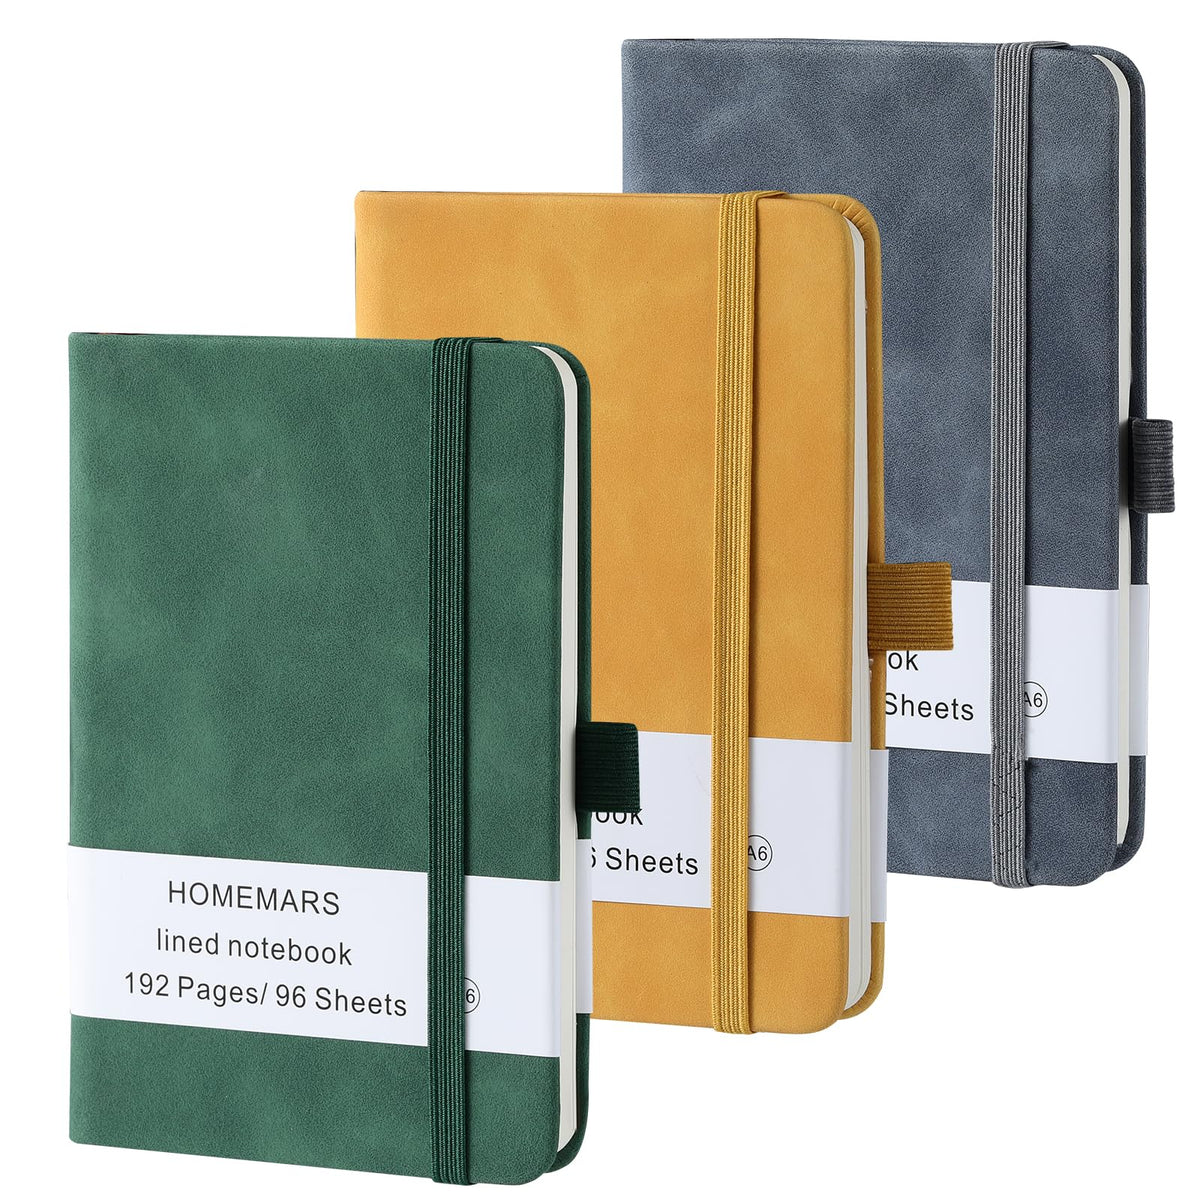 HOMEMARS Pocket Notebook, Small Notebook, 3 Pack, Pocket Notepad, 14.4 cm x 9.6cm, A6 Notebook, Small Notepad, Blue, Pink, Gray, 192 Pages Each, Hardcover, Lined Paper, Vegan Leather with Pen Loop